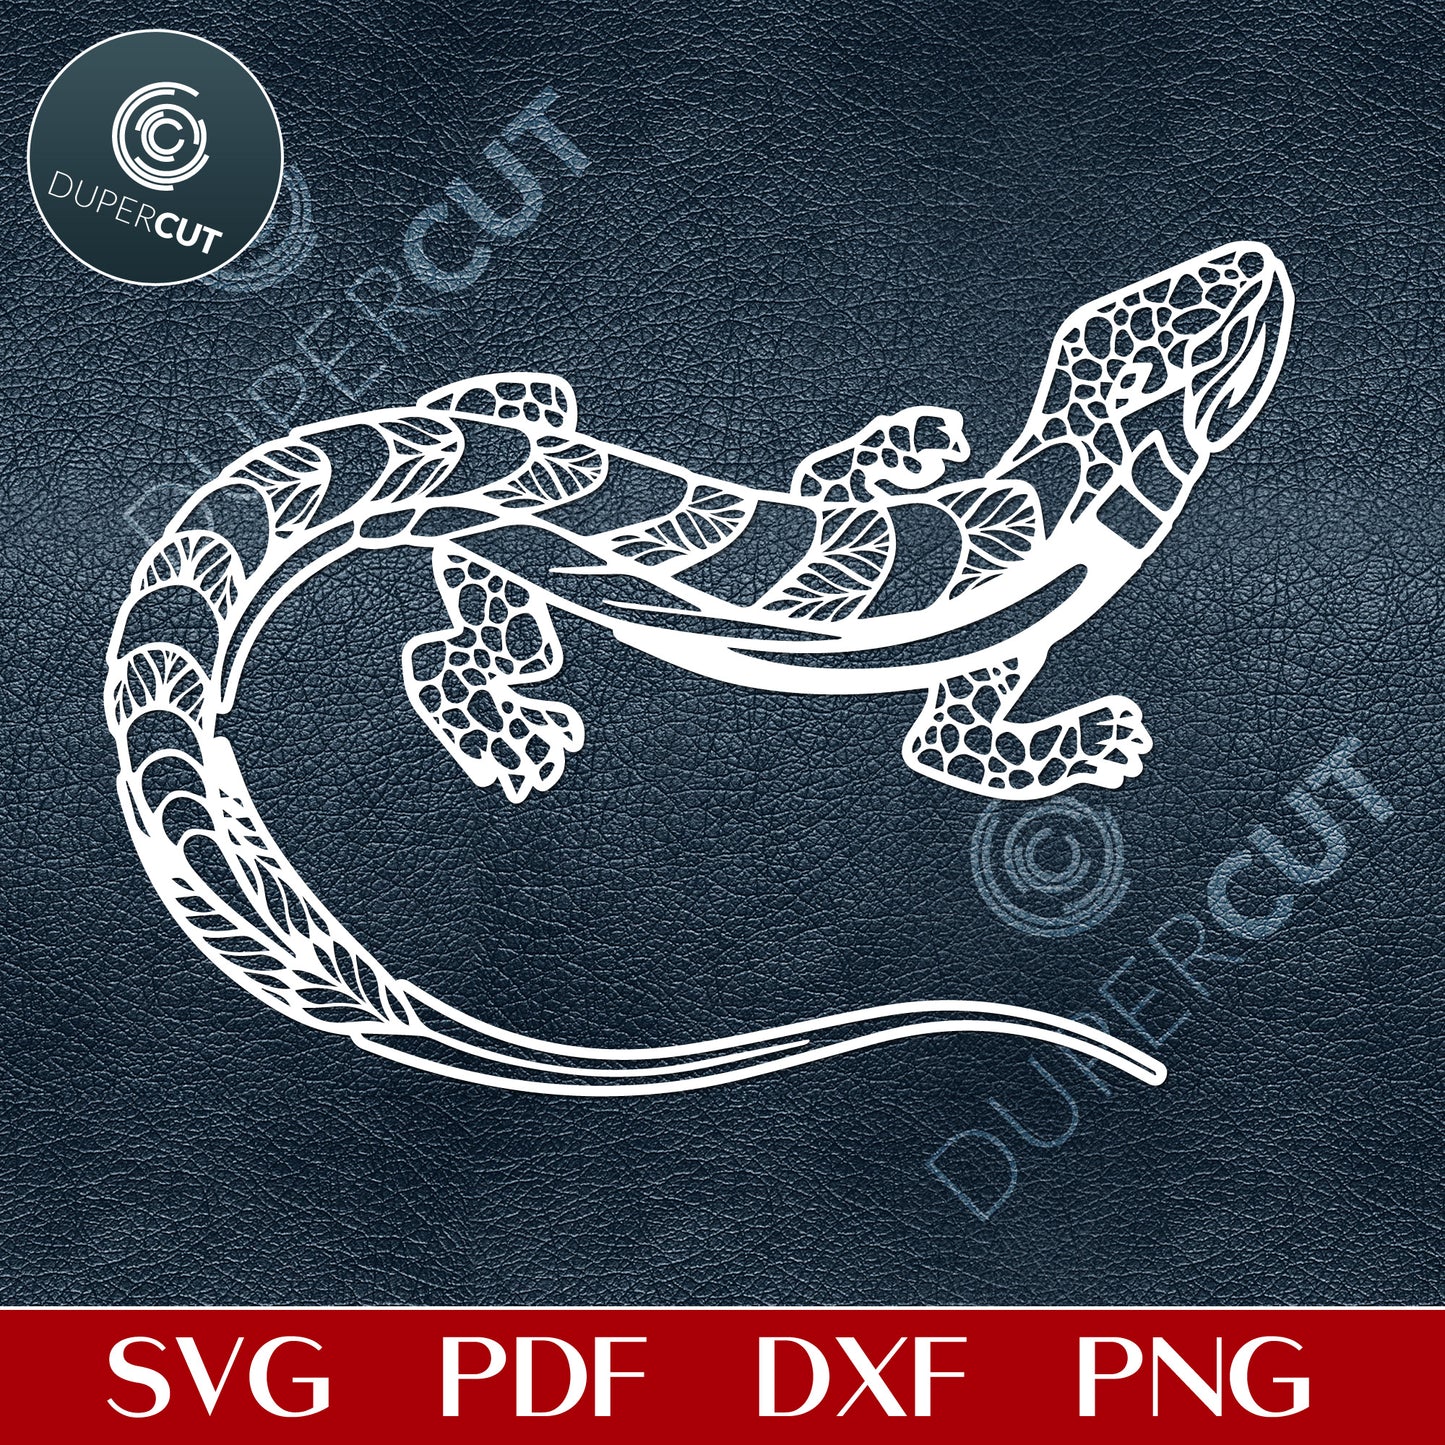 Gecko lizard, tattoo line art. SVG PNG DXF files for cutting, laser engraving, scrapbooking. For use with Cricut, Glowforge, Silhouette, CNC machines.